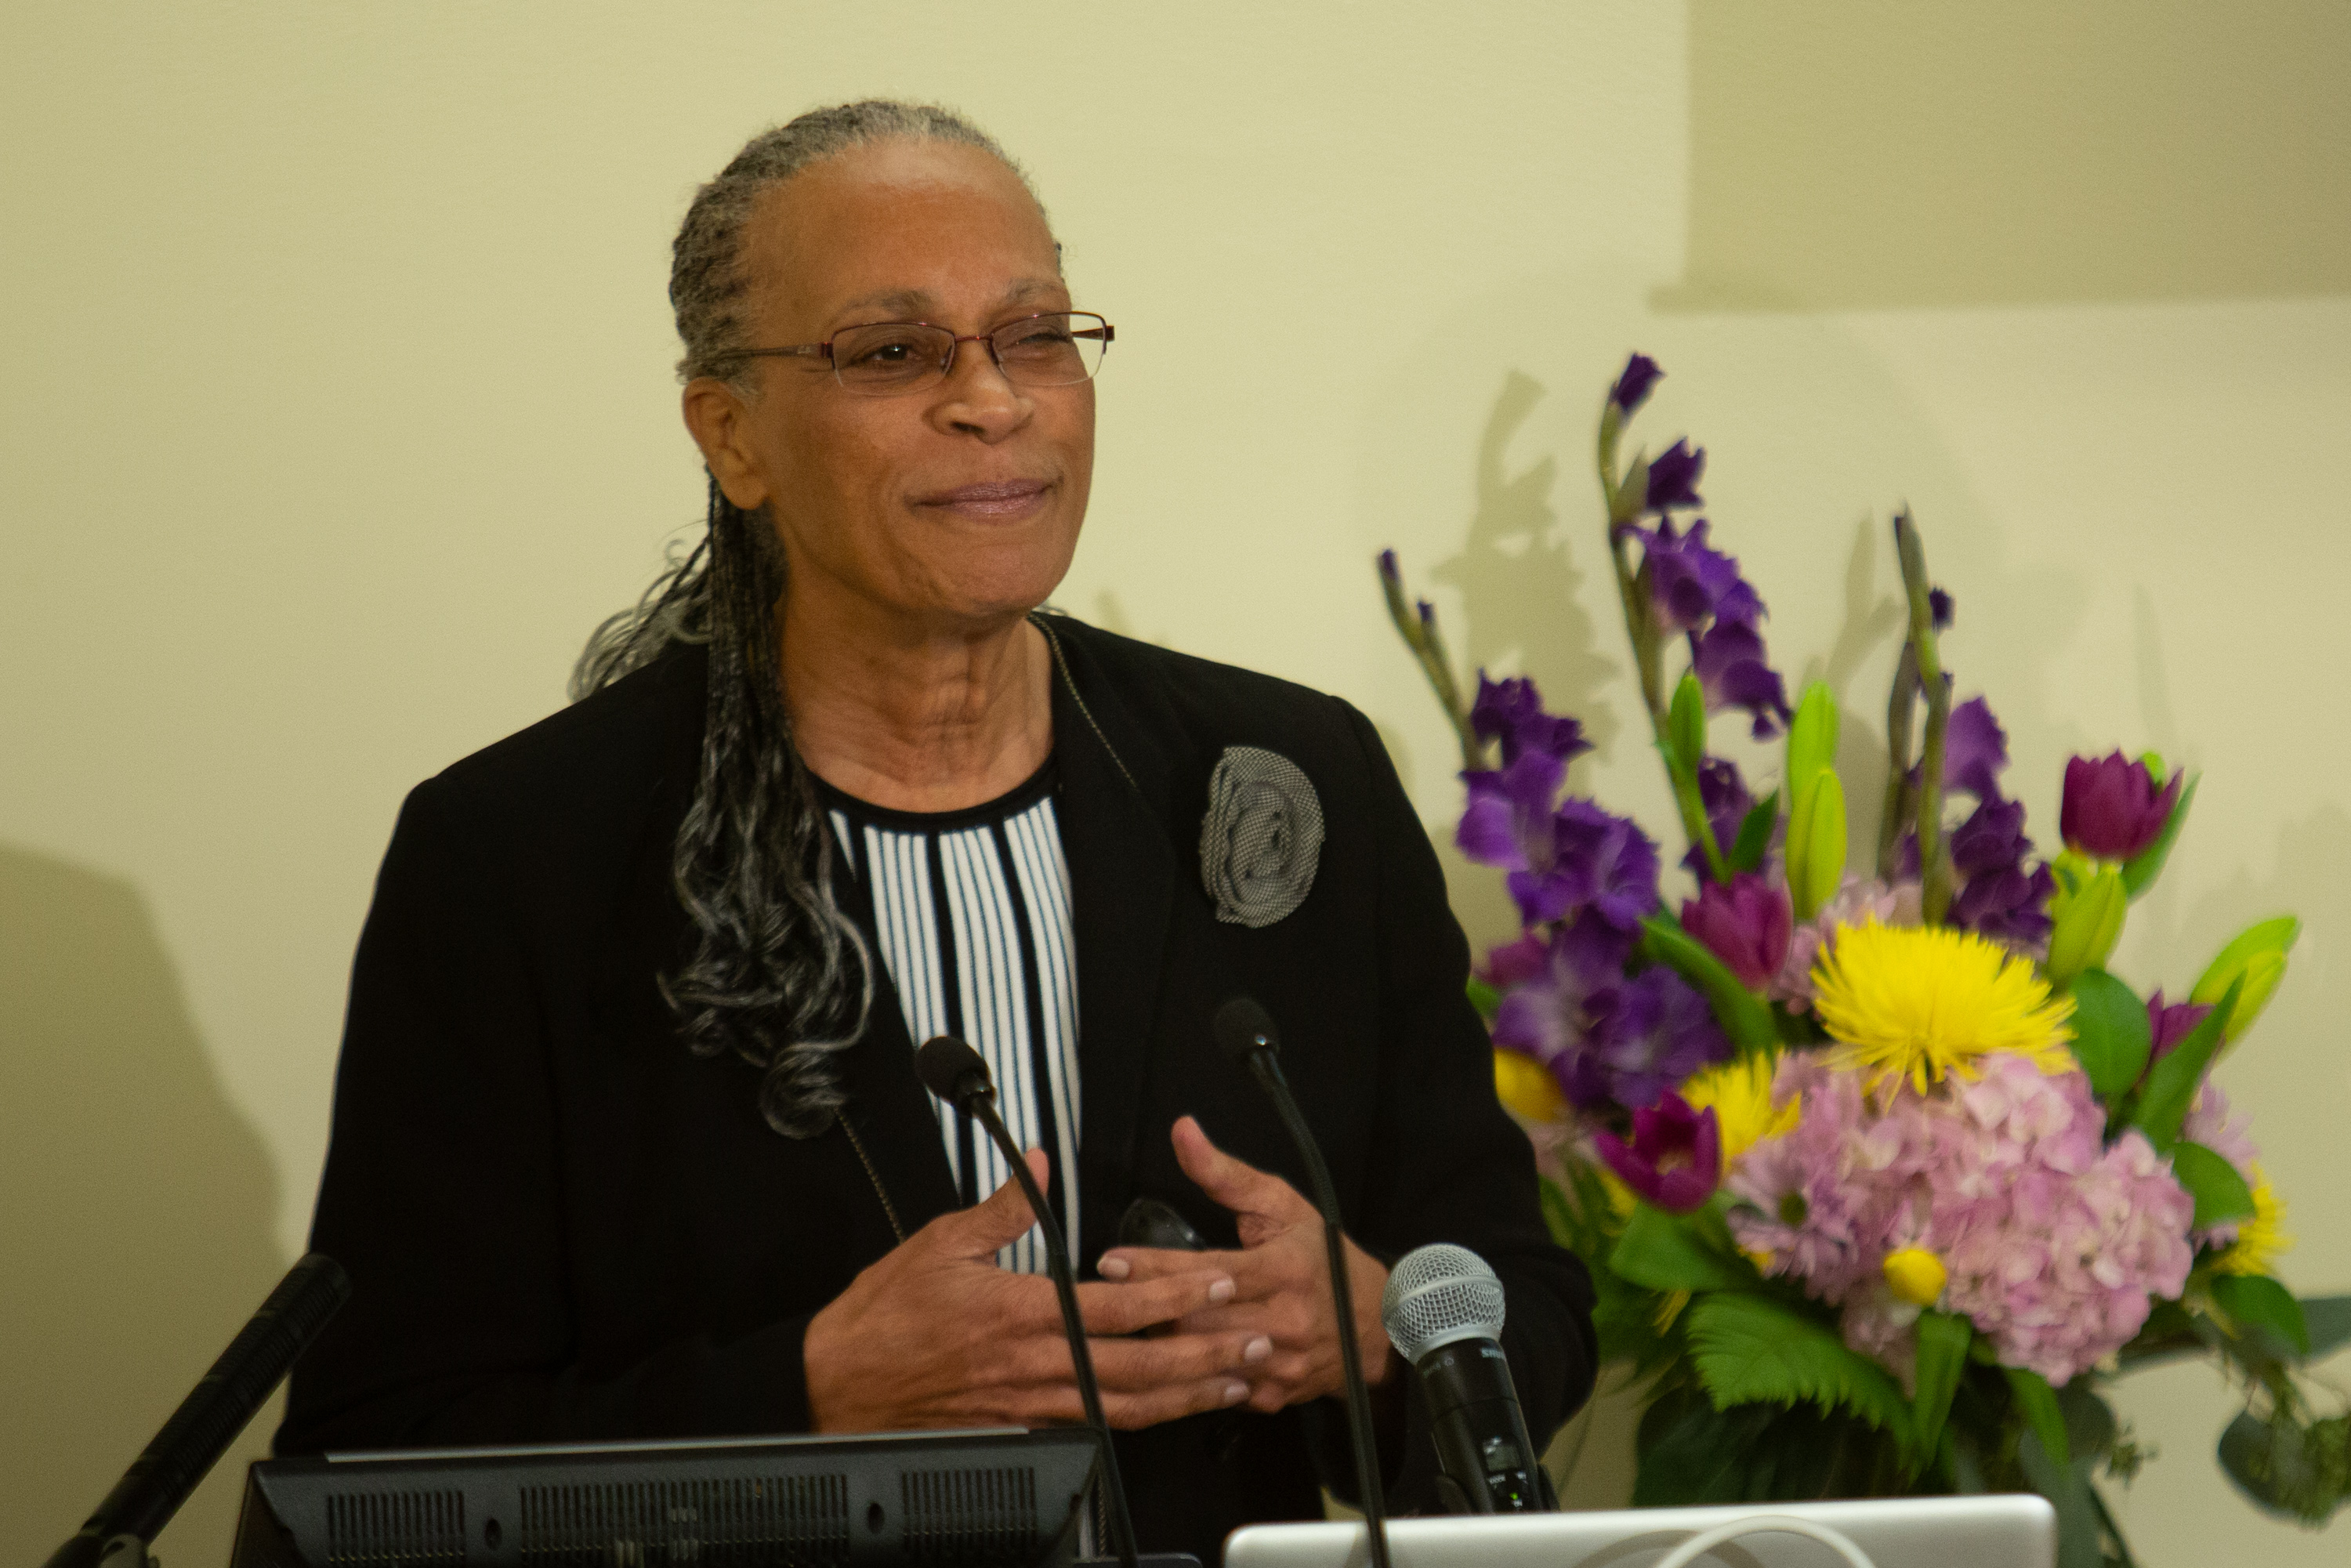 Dr. Arnetha Ball speaks at the podium with a bouquet of flowers in the background.